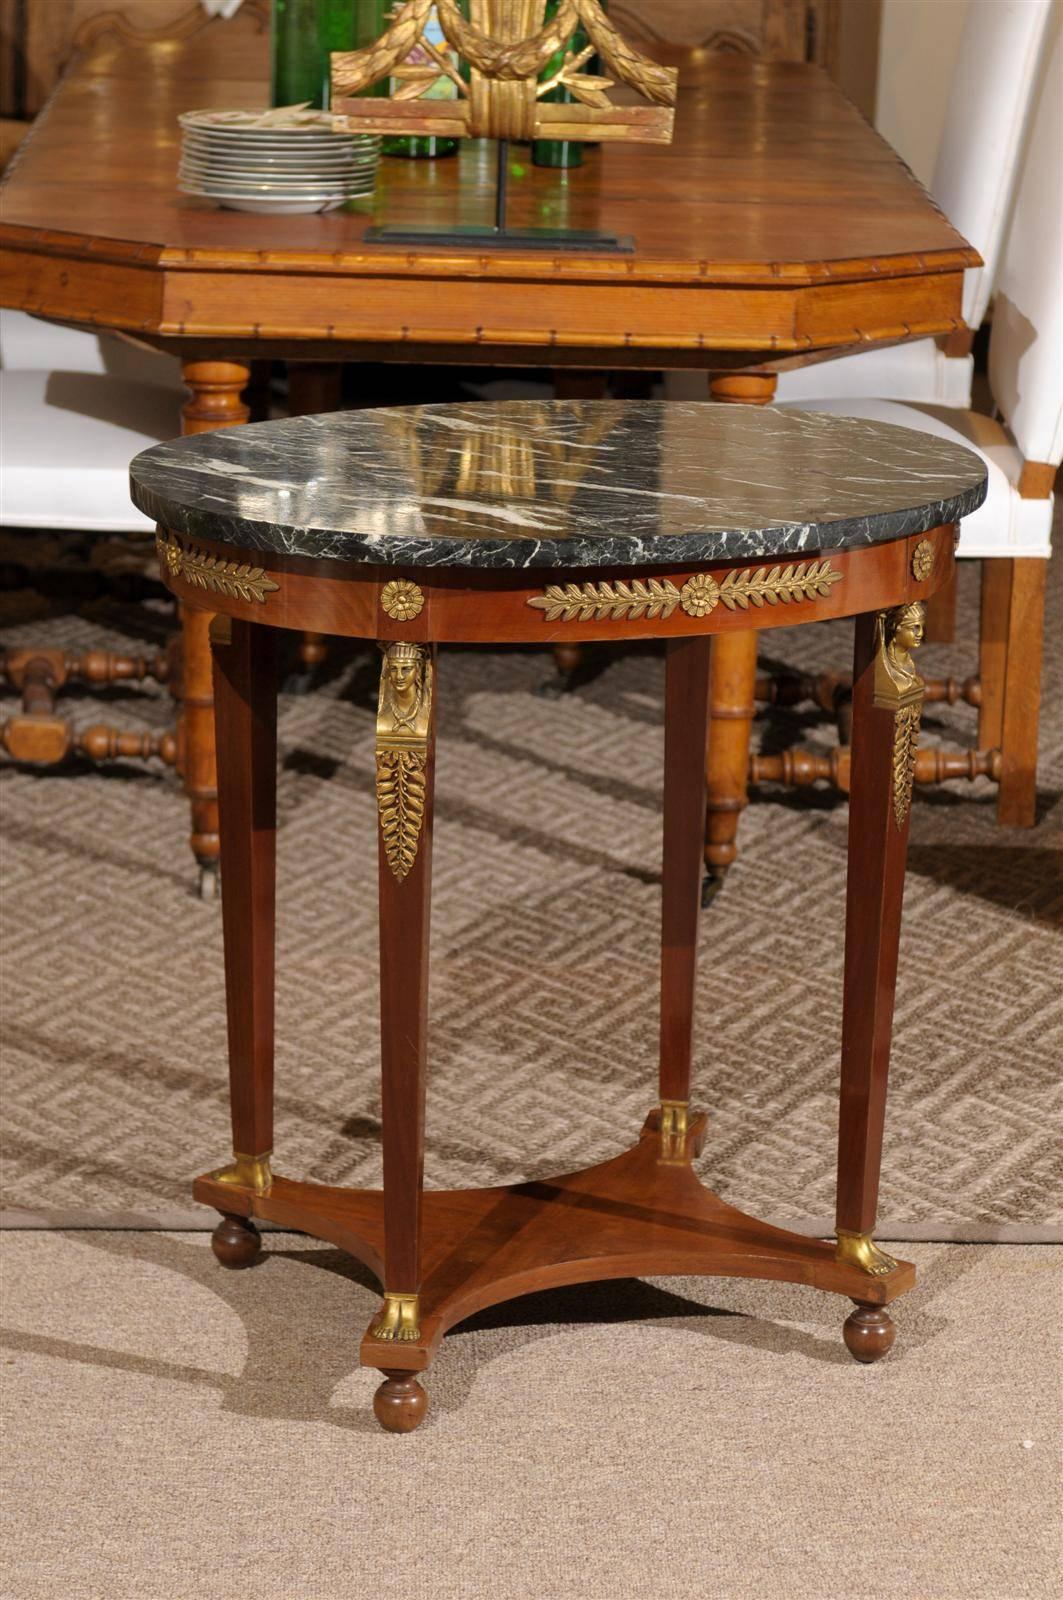 Empire Style Mahogany Oval Gueridon with Marble Top, circa 1900
This little table contributes a lot of drama for its size. It is a very pleasing oval shape and the marble has a lot of pattern. The bronze kings on the legs and the bronze